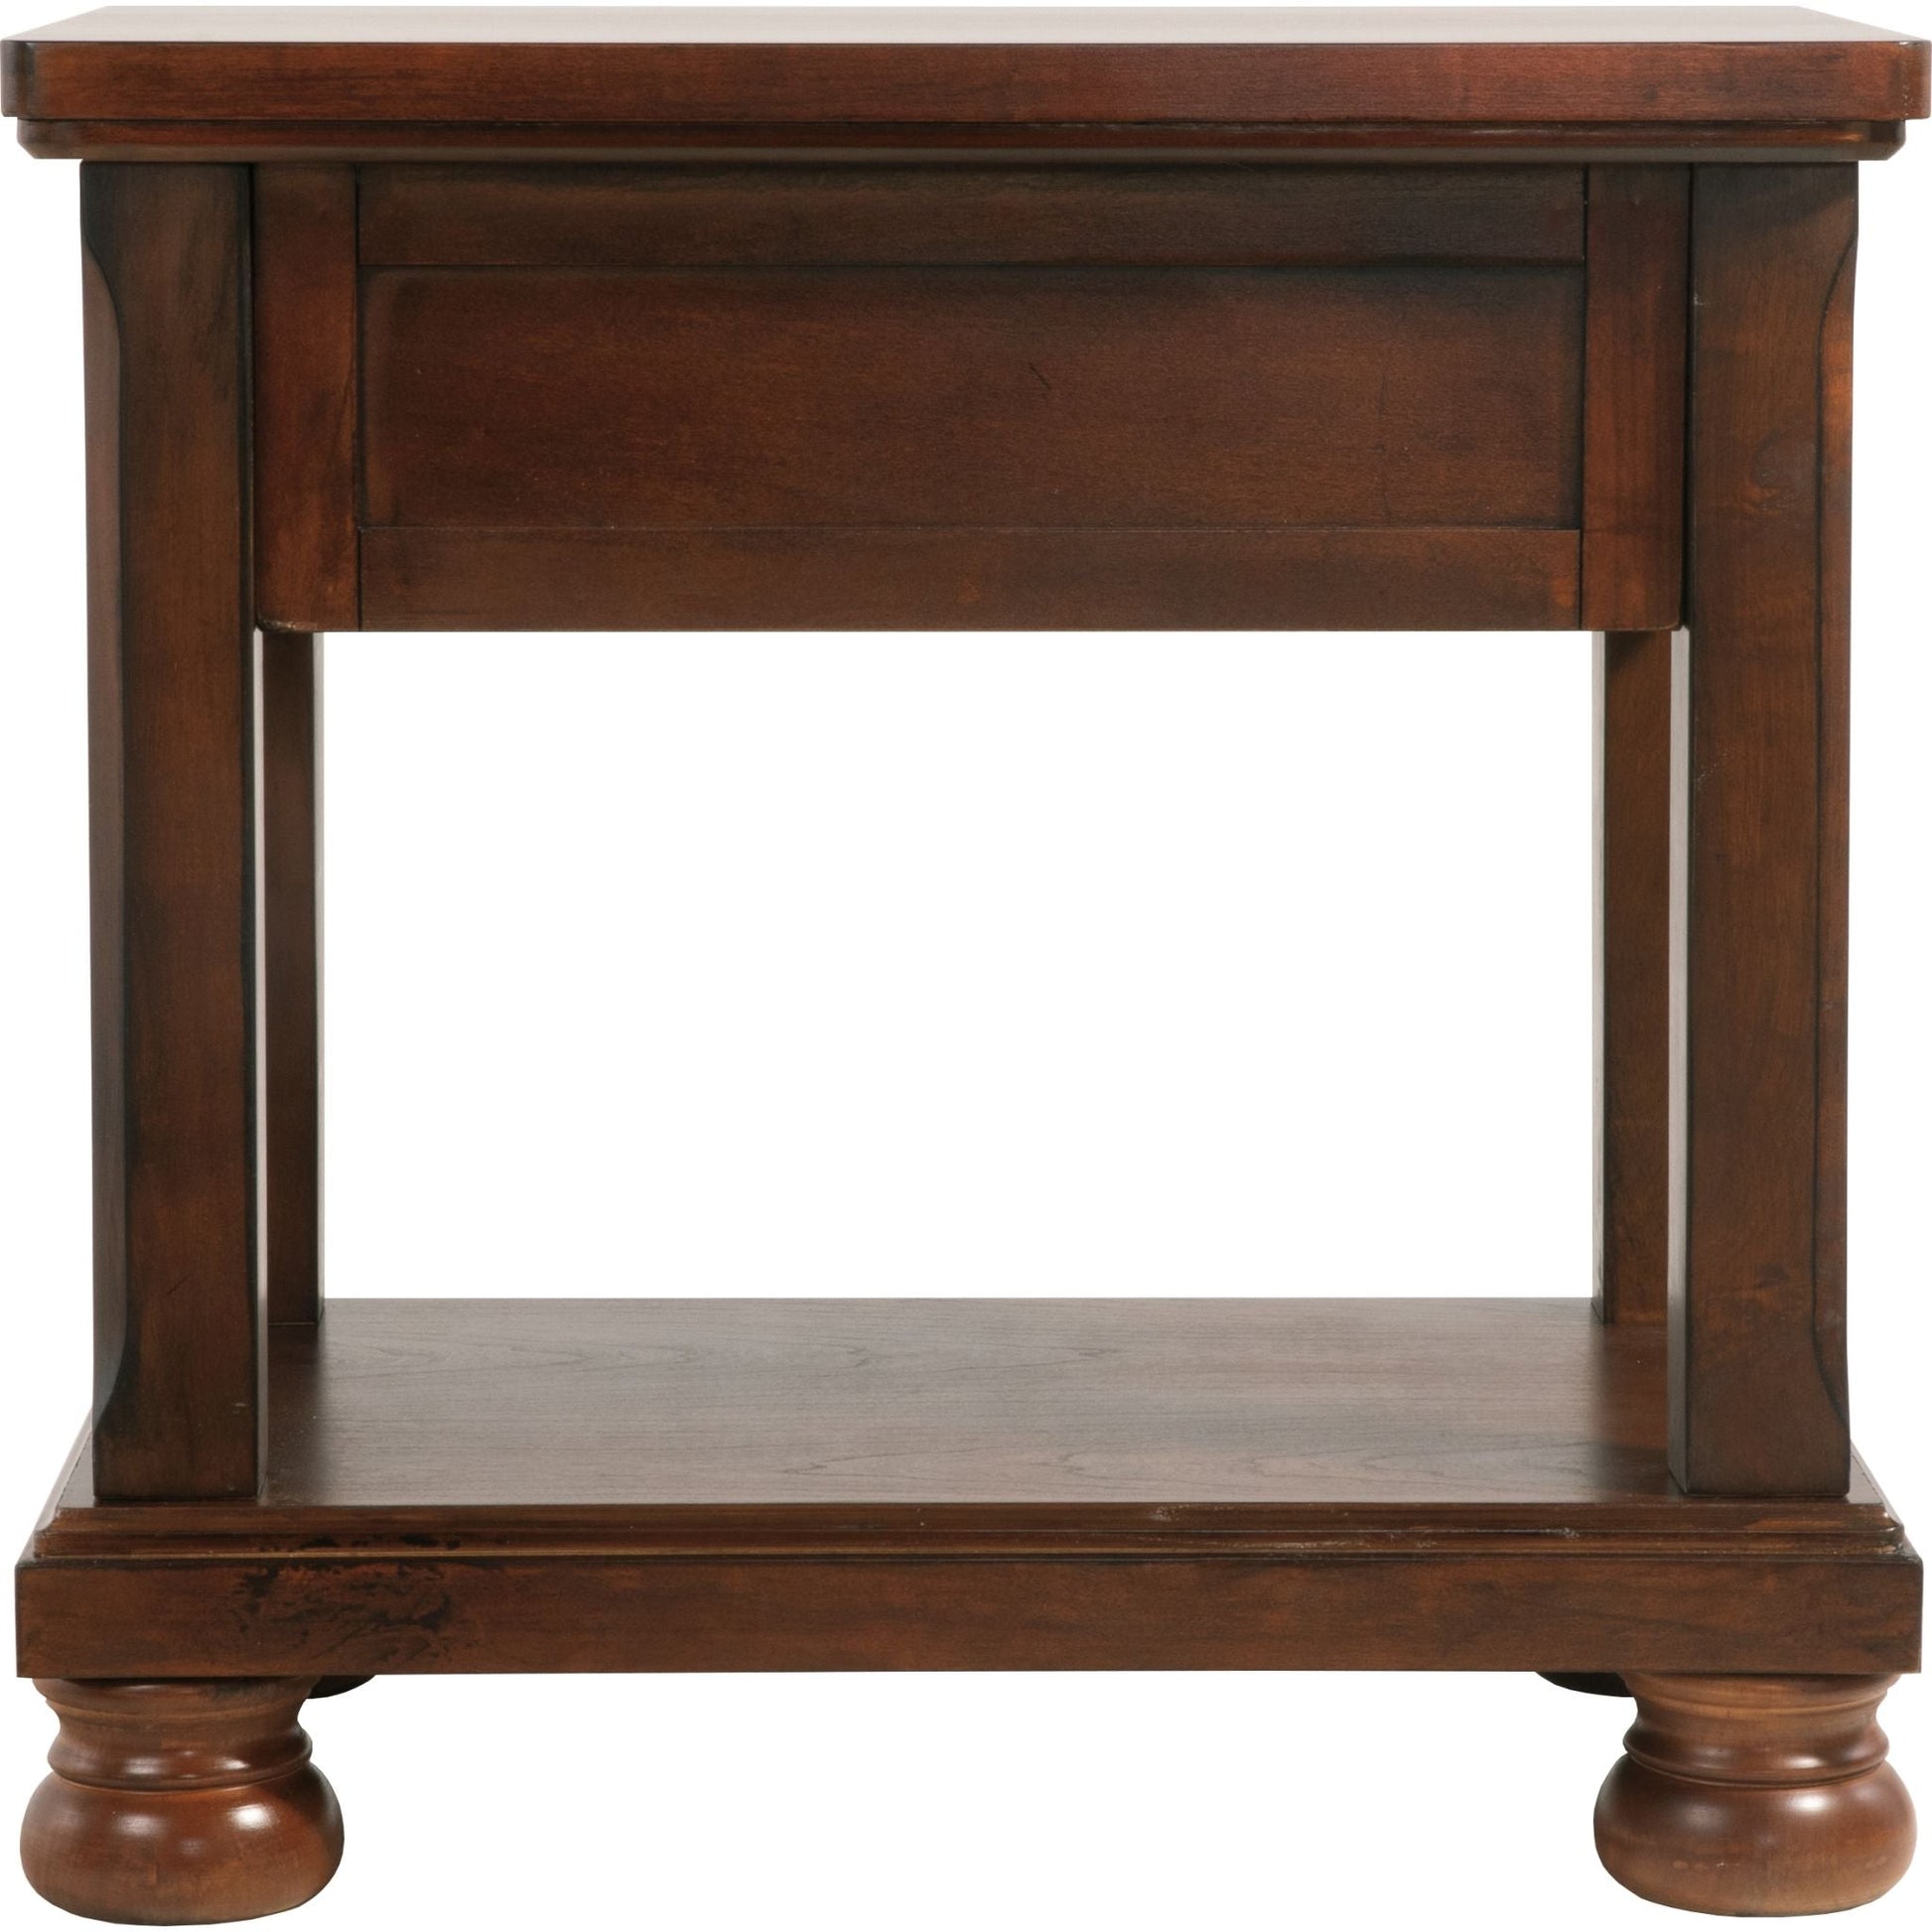 Porter End Table - Rustic Brown